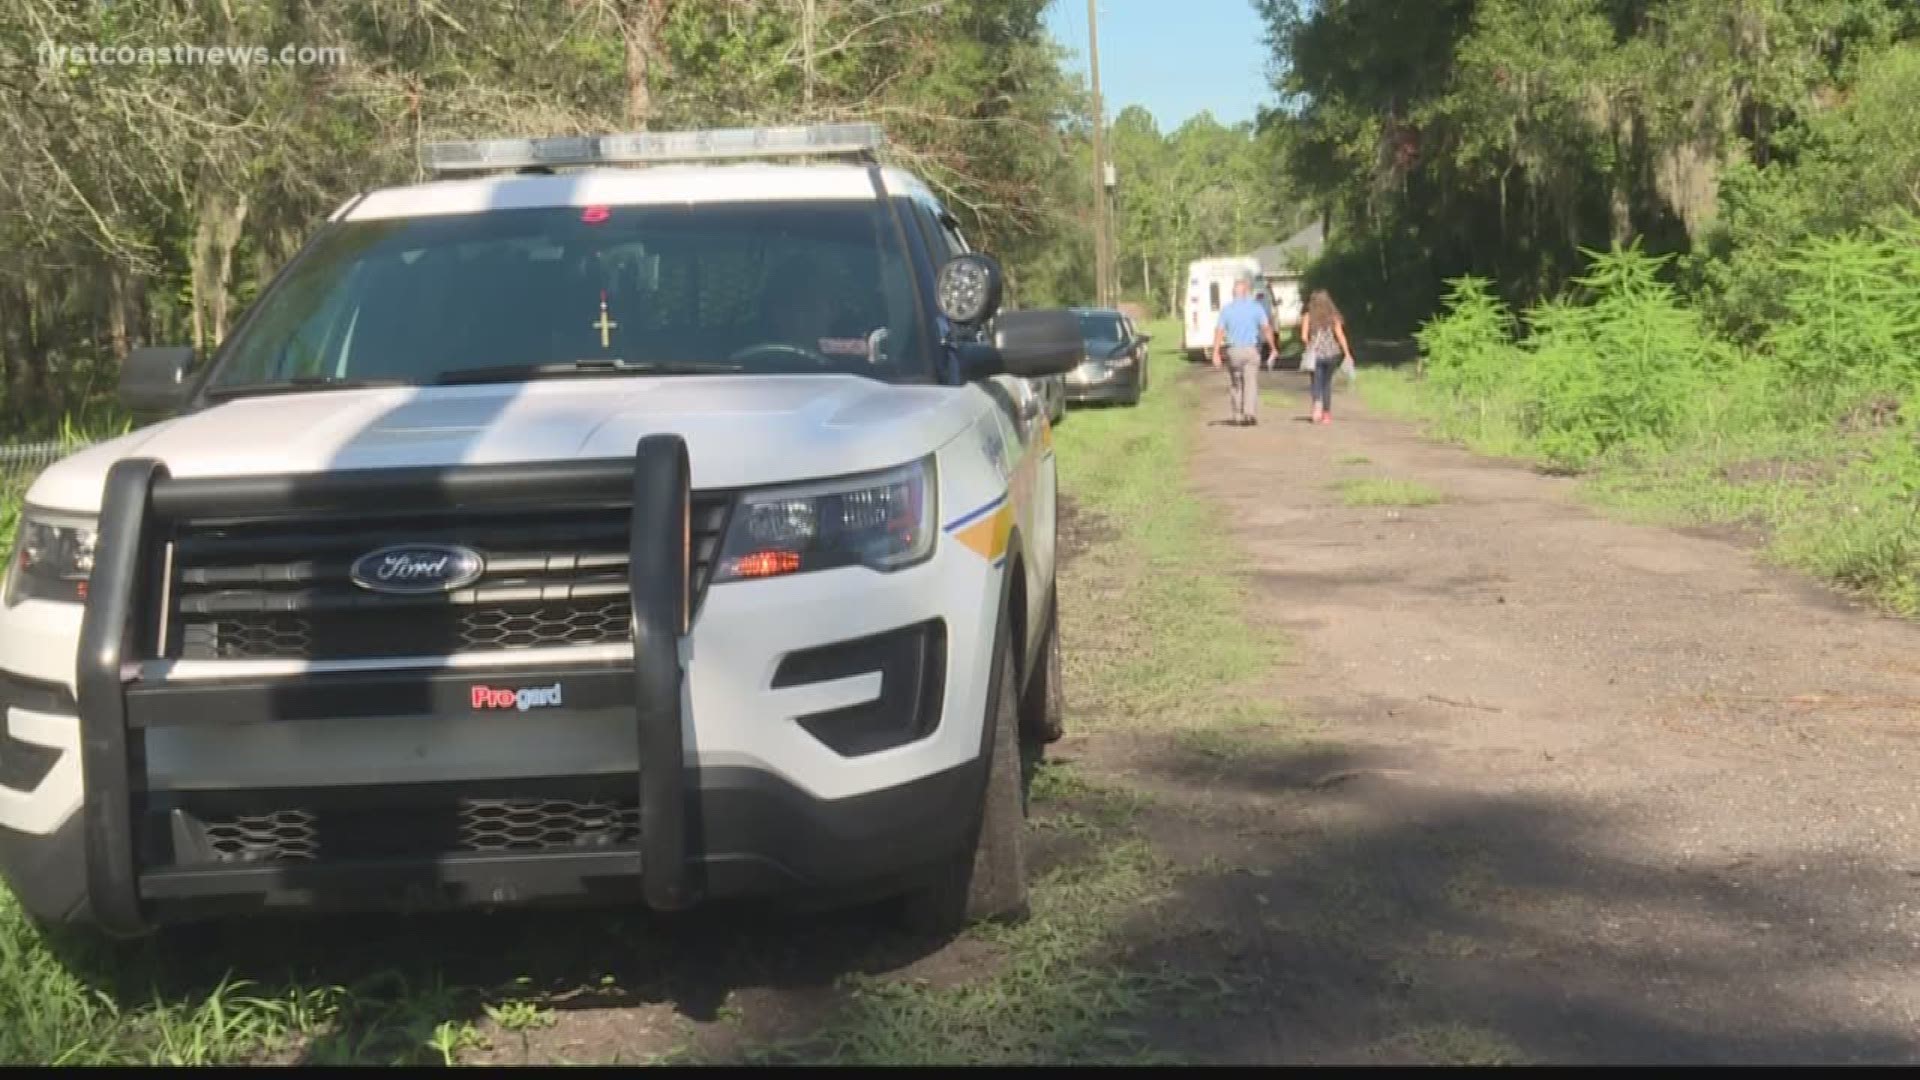 A man discovered the bag of human remains while clearing woods across from his house along Utsey Road. Police and medical examiners have been working to identify the remains, but at this time, no identification has been made, police said.